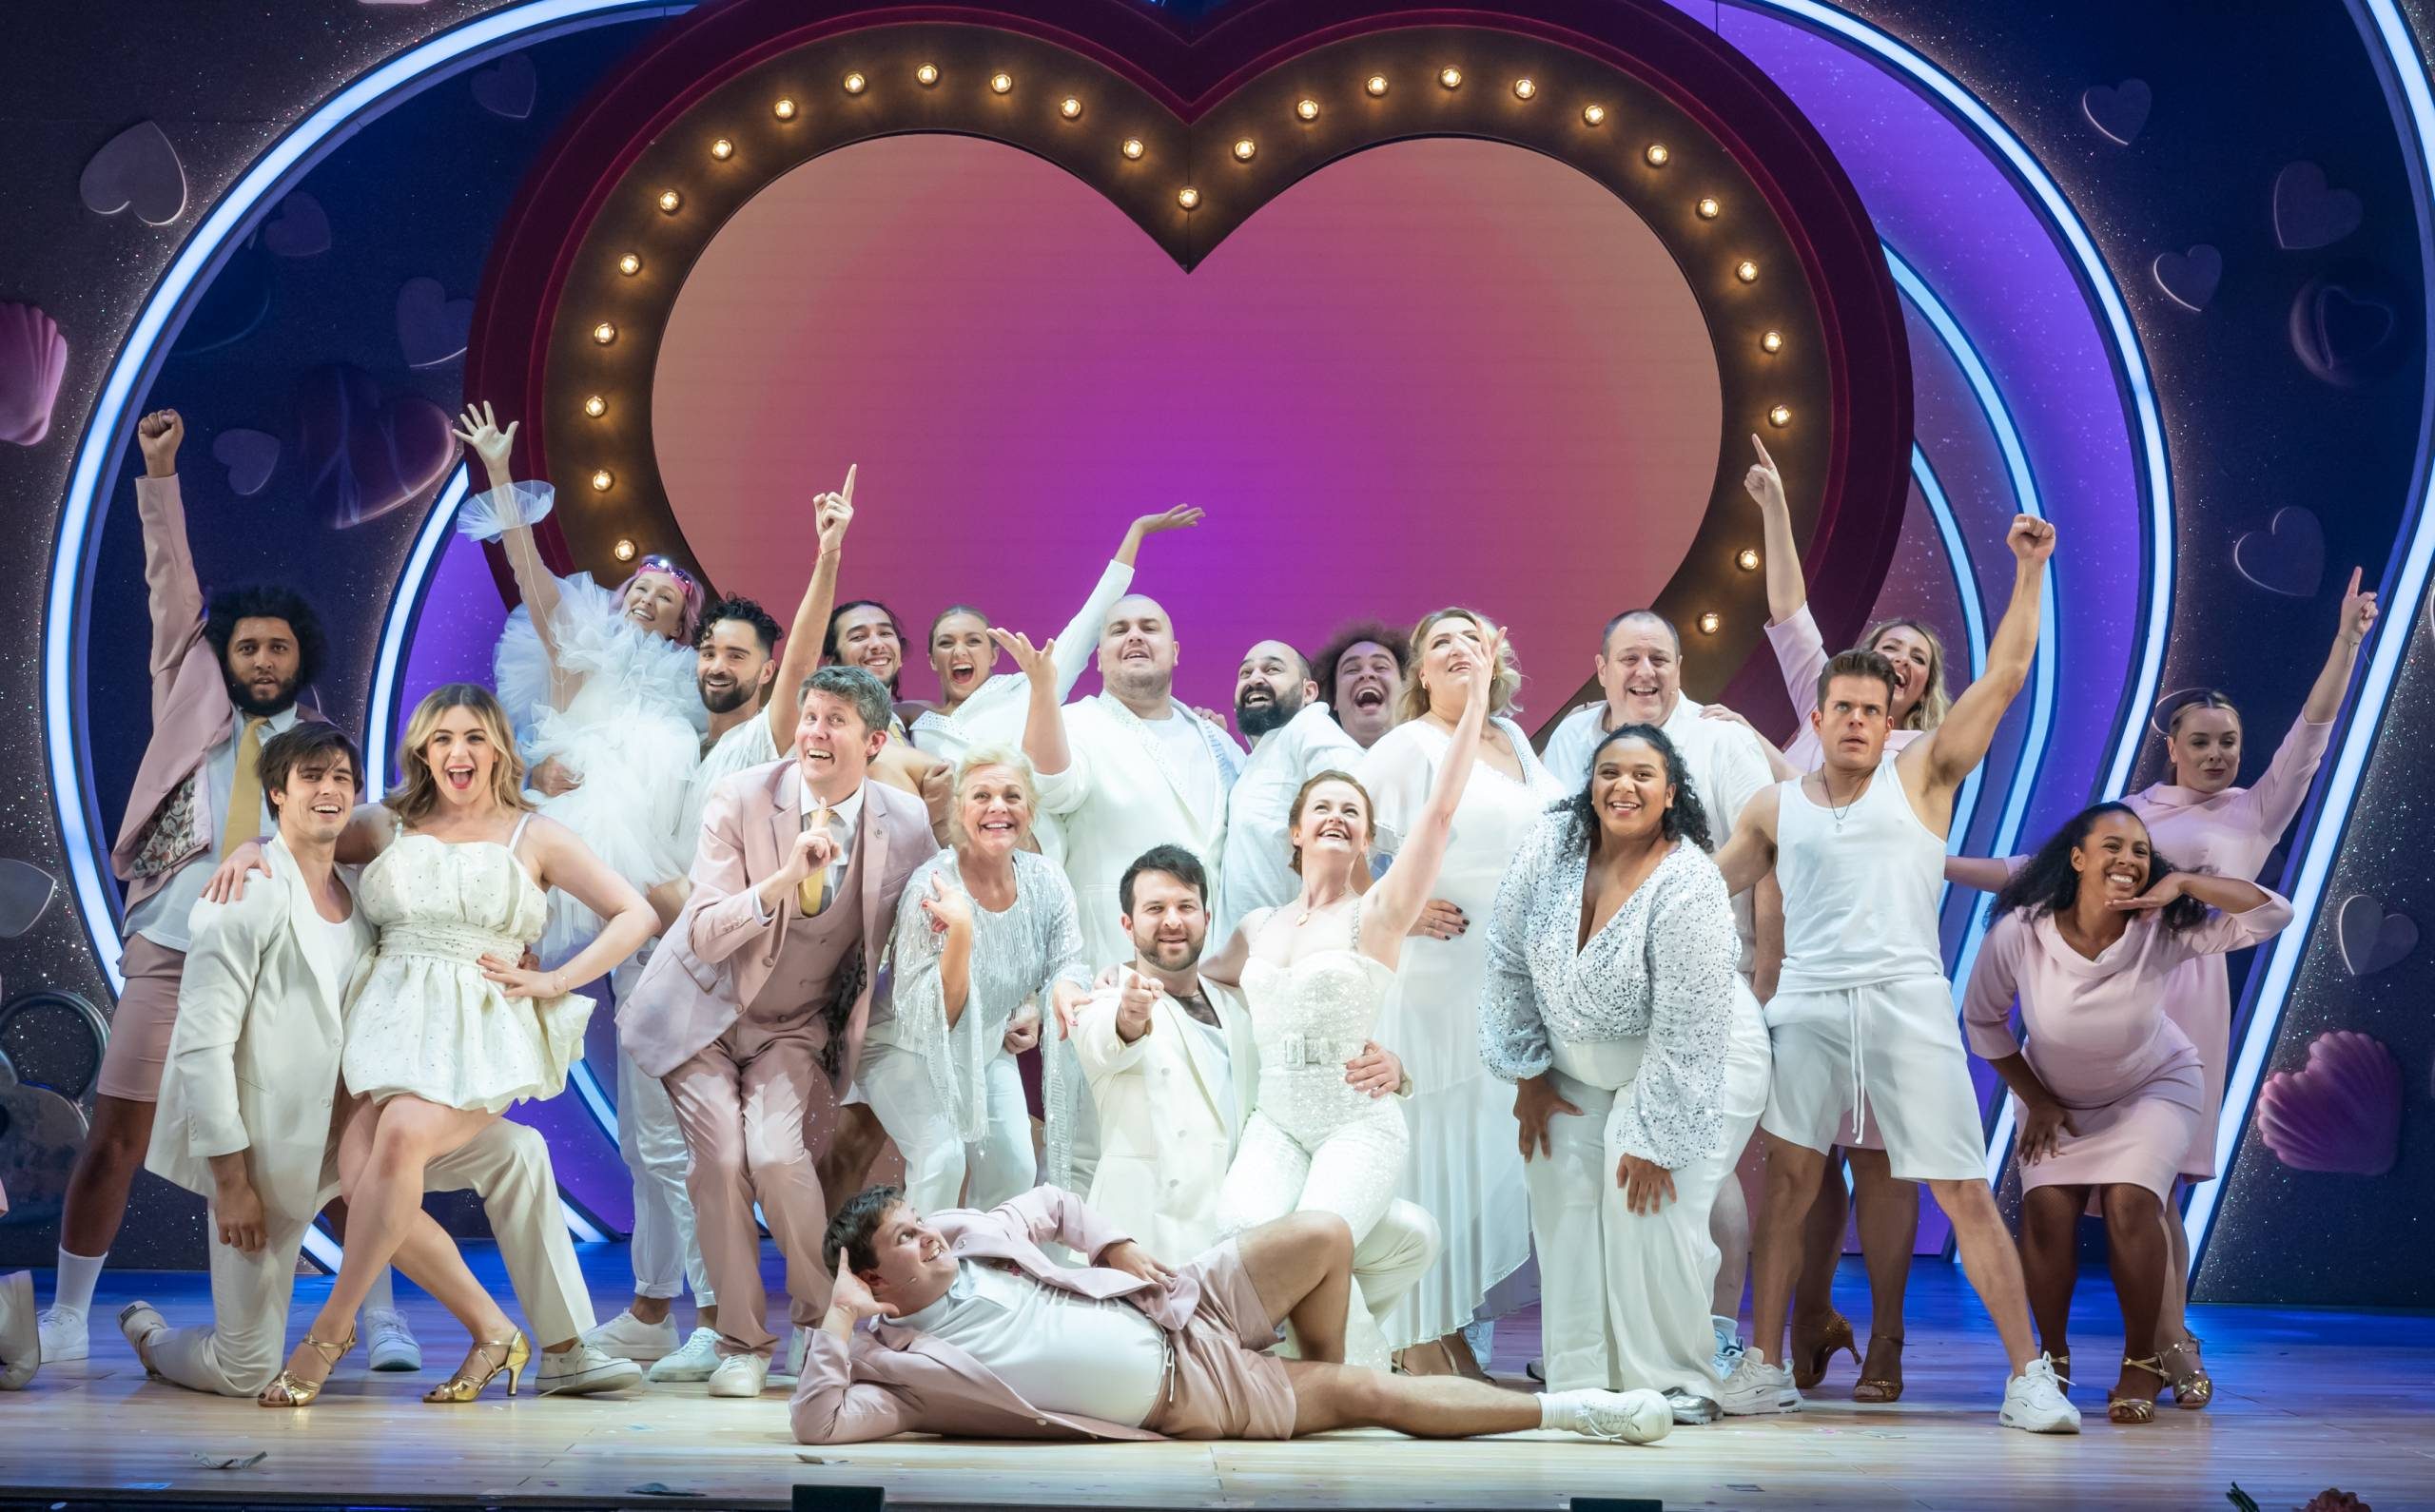 the entire cast of I Should Be So lucky dressed in white and posing.